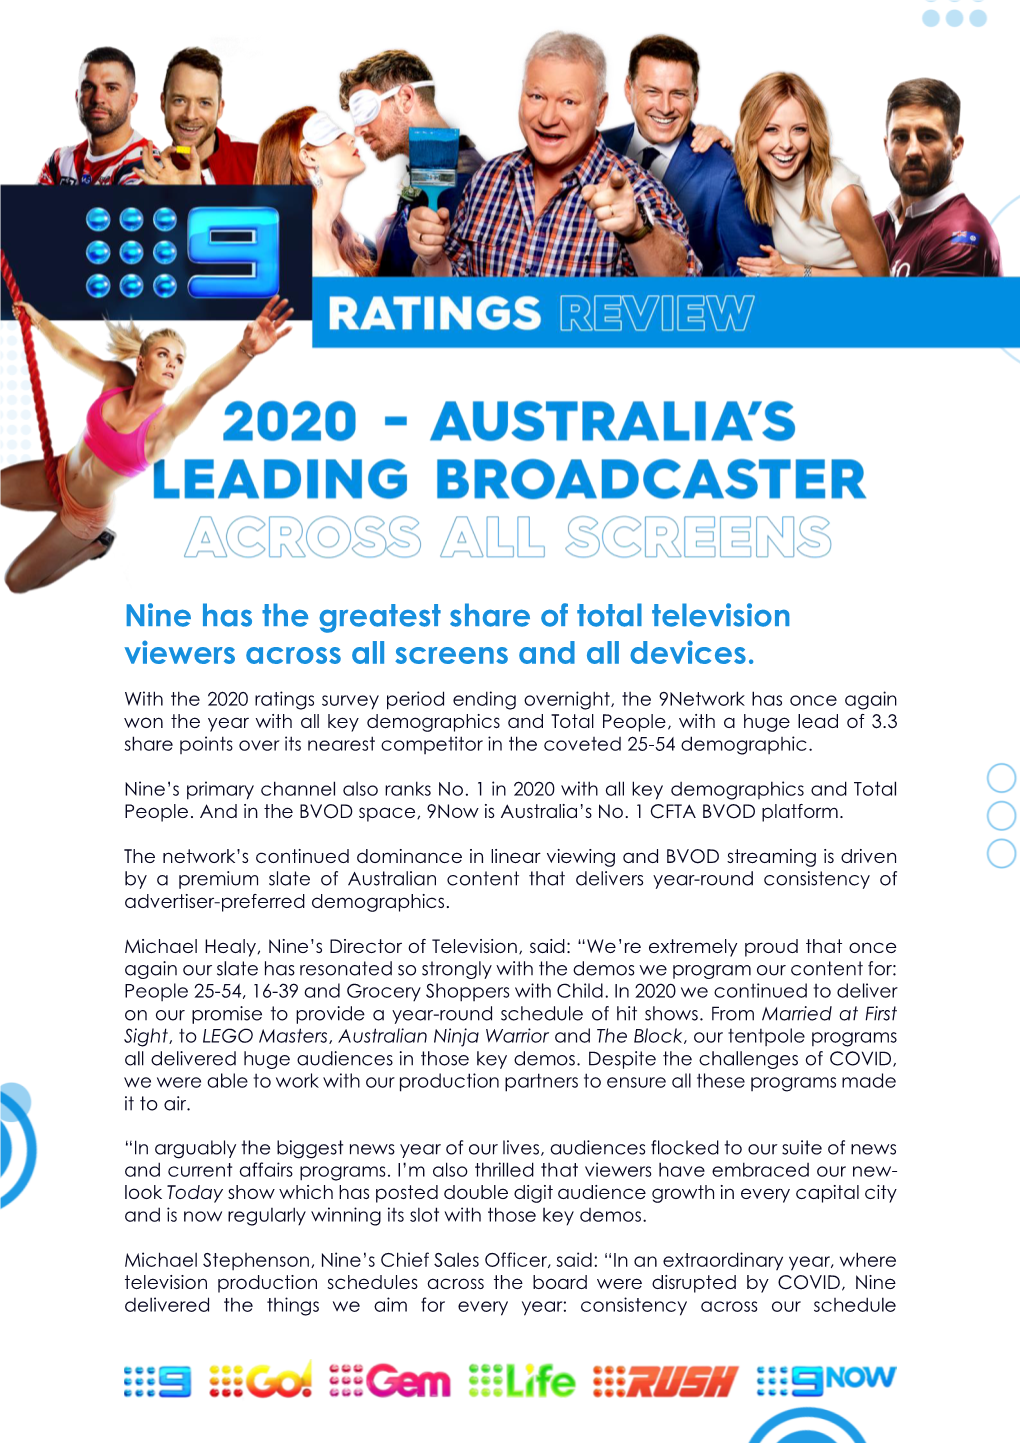 Nine Has the Greatest Share of Total Television Viewers Across All Screens and All Devices